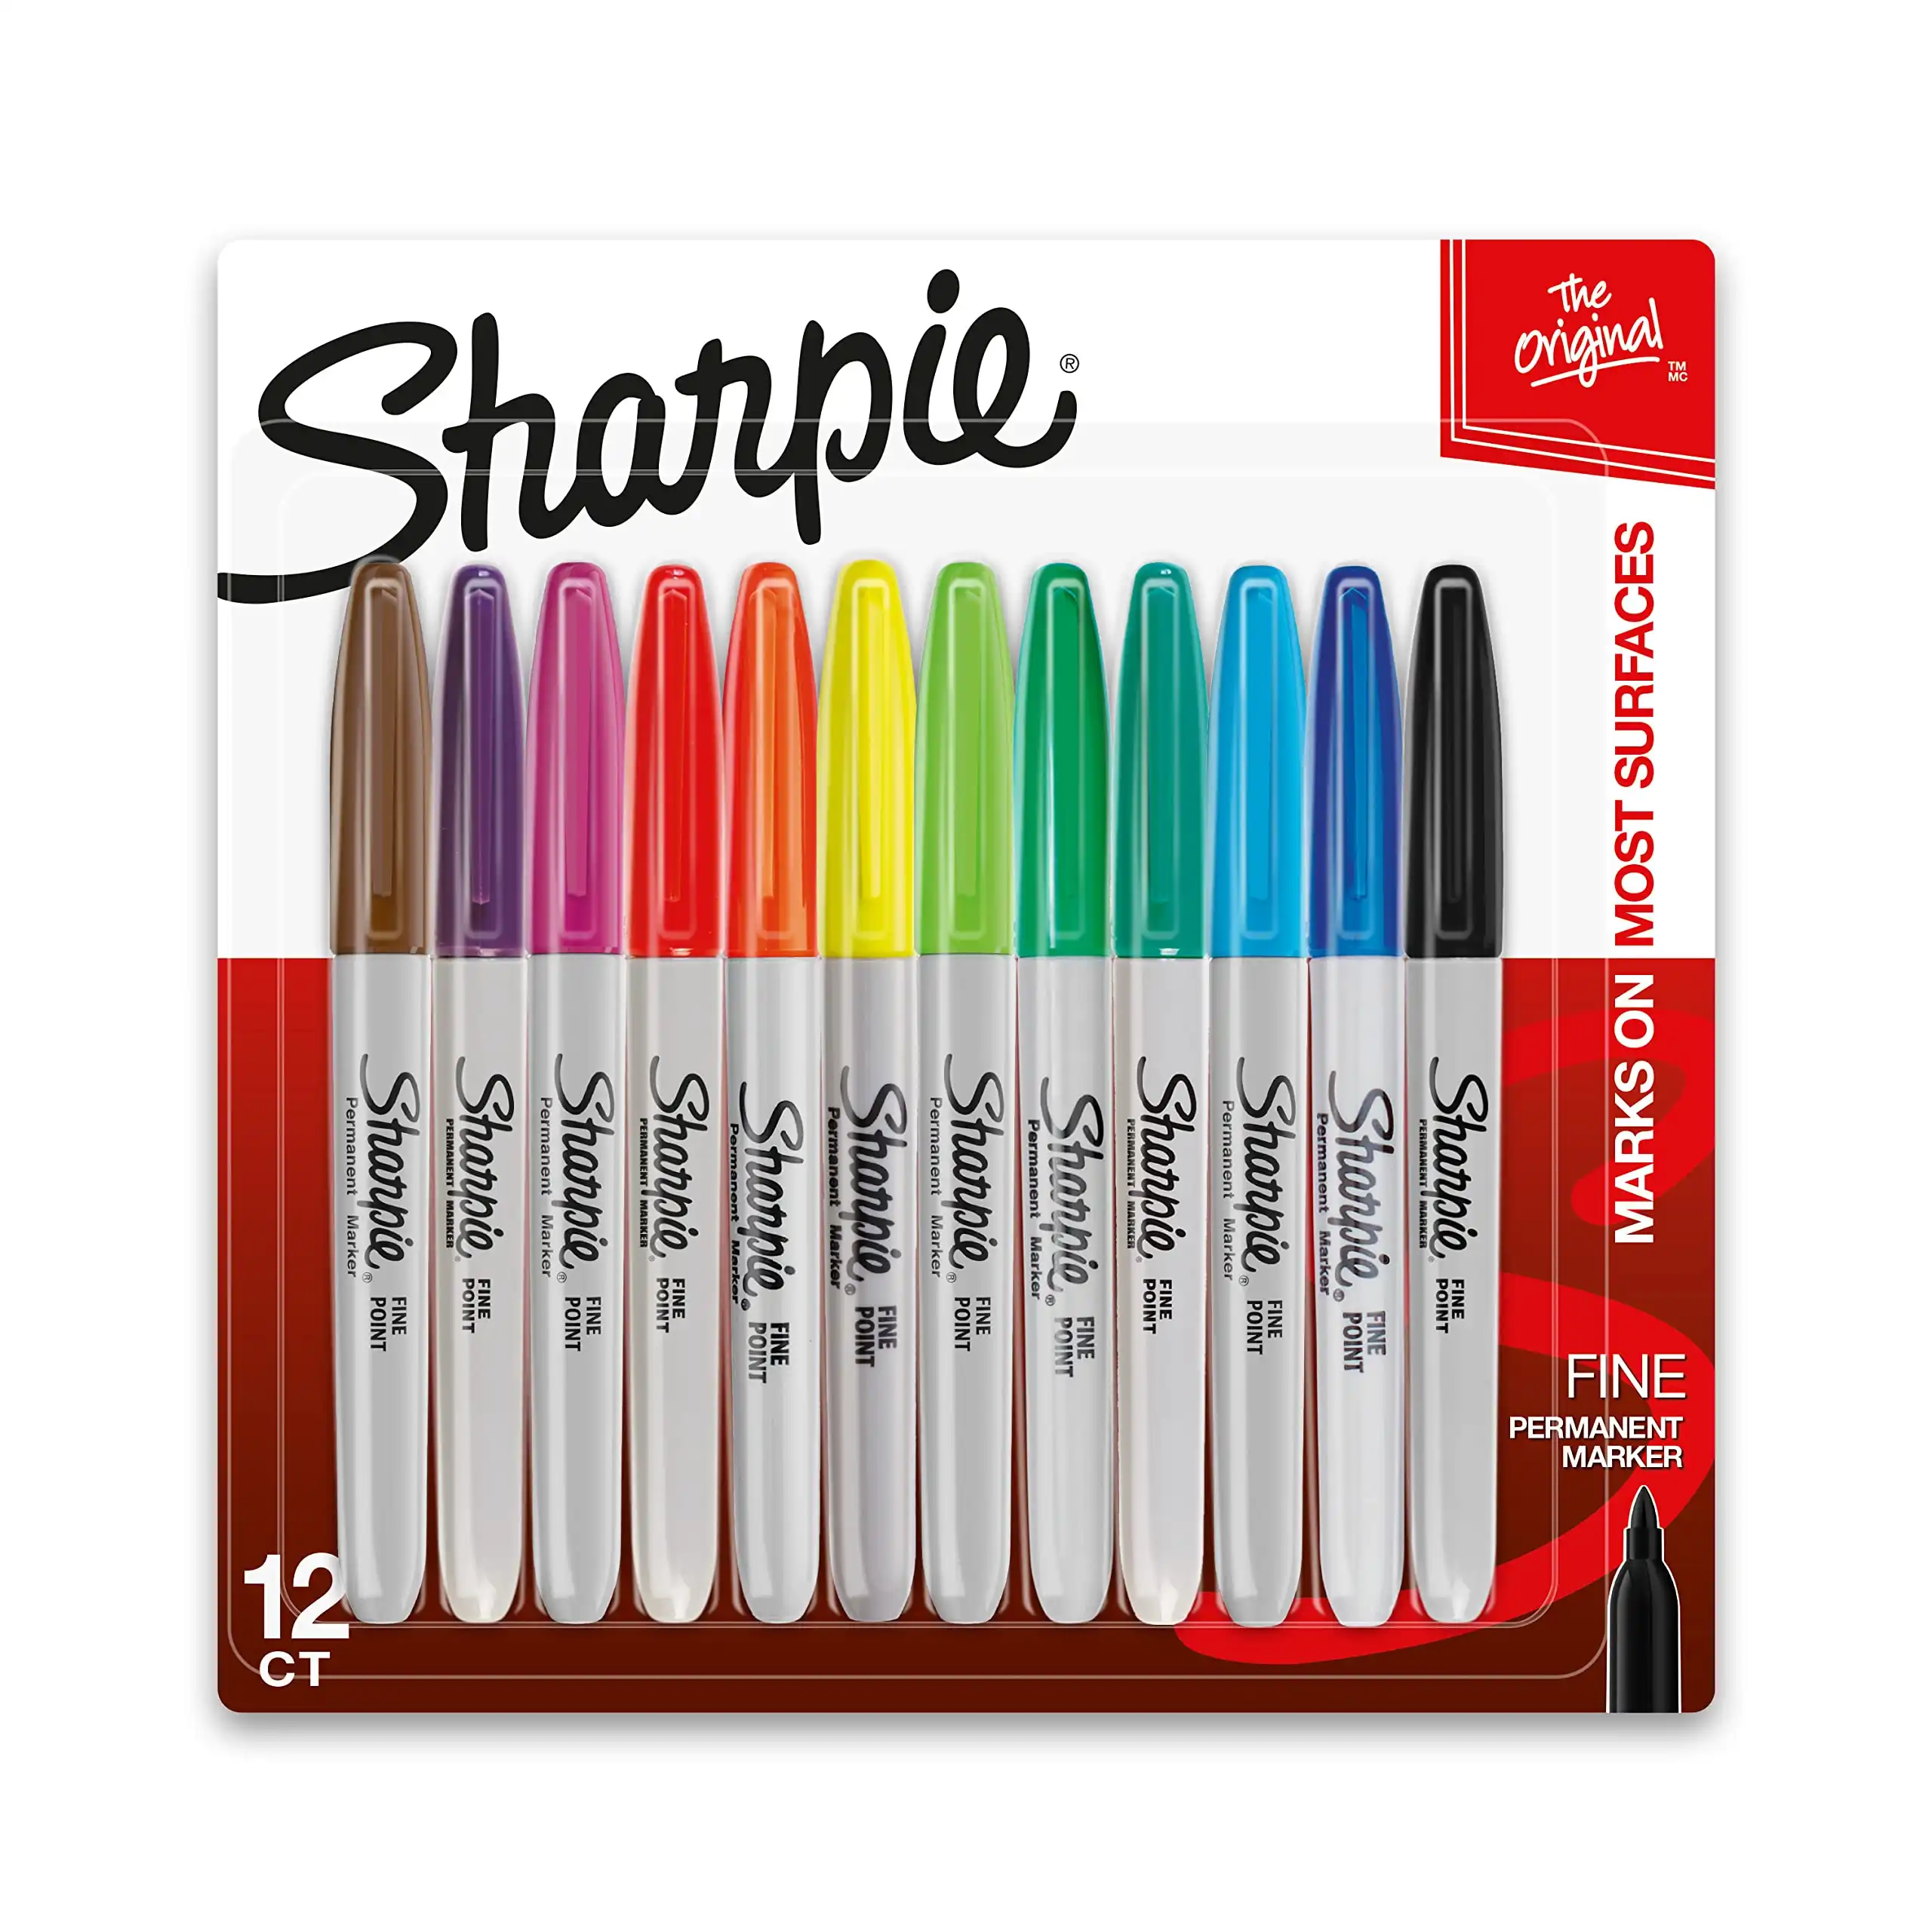 Up to 74% Off Various Sharpie Products!